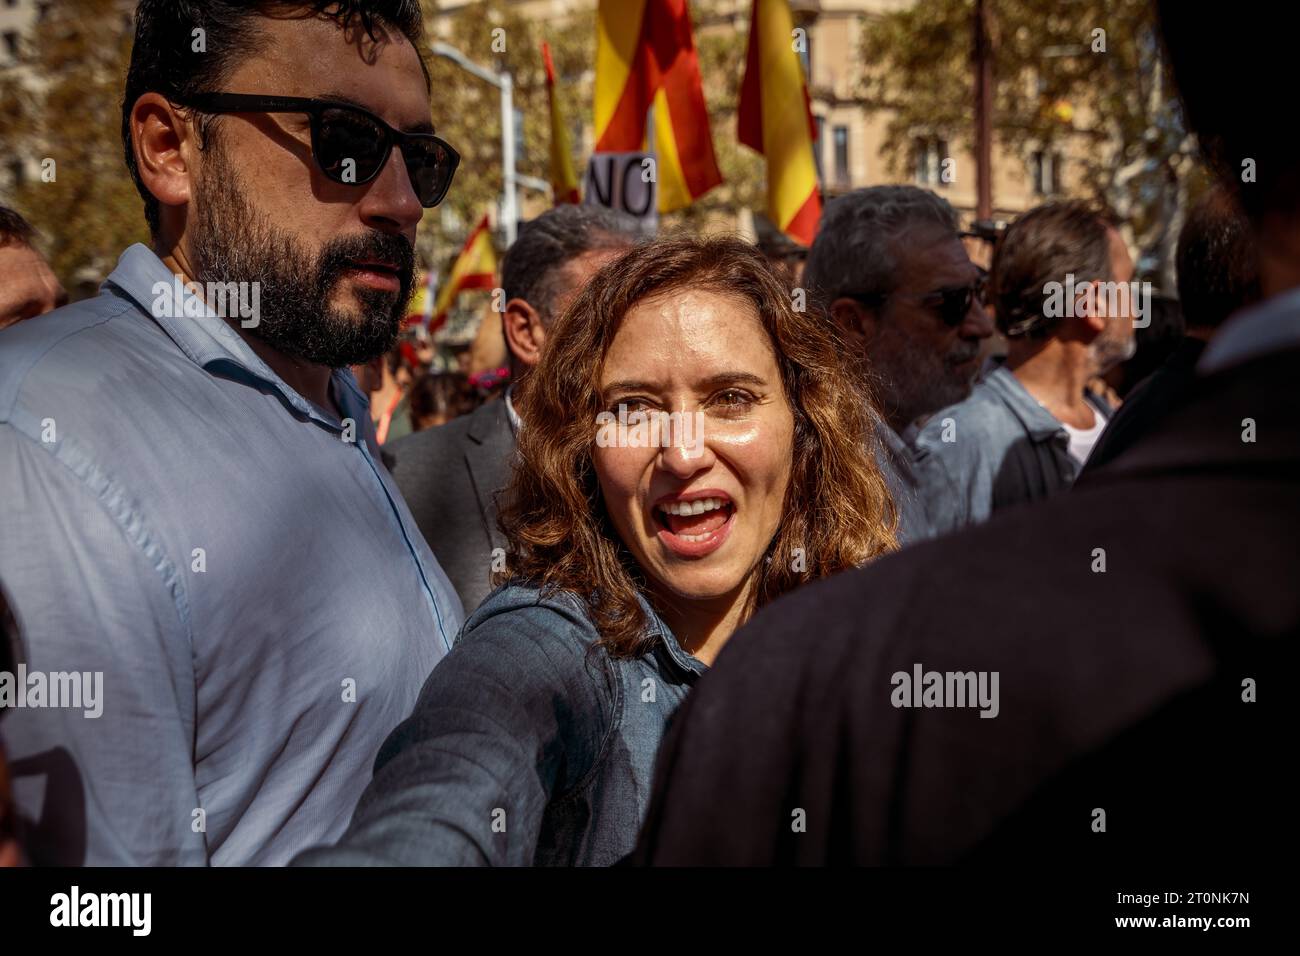 Barcelona, Spain. 8th Oct, 2023. ISABEL DIAZ AYUSO, president of community of Madrid, participates in a protest against an amnesty offered to politicians who took part in an illegal referendum on Catalan independence in October 2017 in exchange for votes in the Spanish parliament to re-elect Pedro Sanchez under the slogan 'Not in my name. Neither amnesty nor self-government' Credit: Matthias Oesterle/Alamy Live News Stock Photo